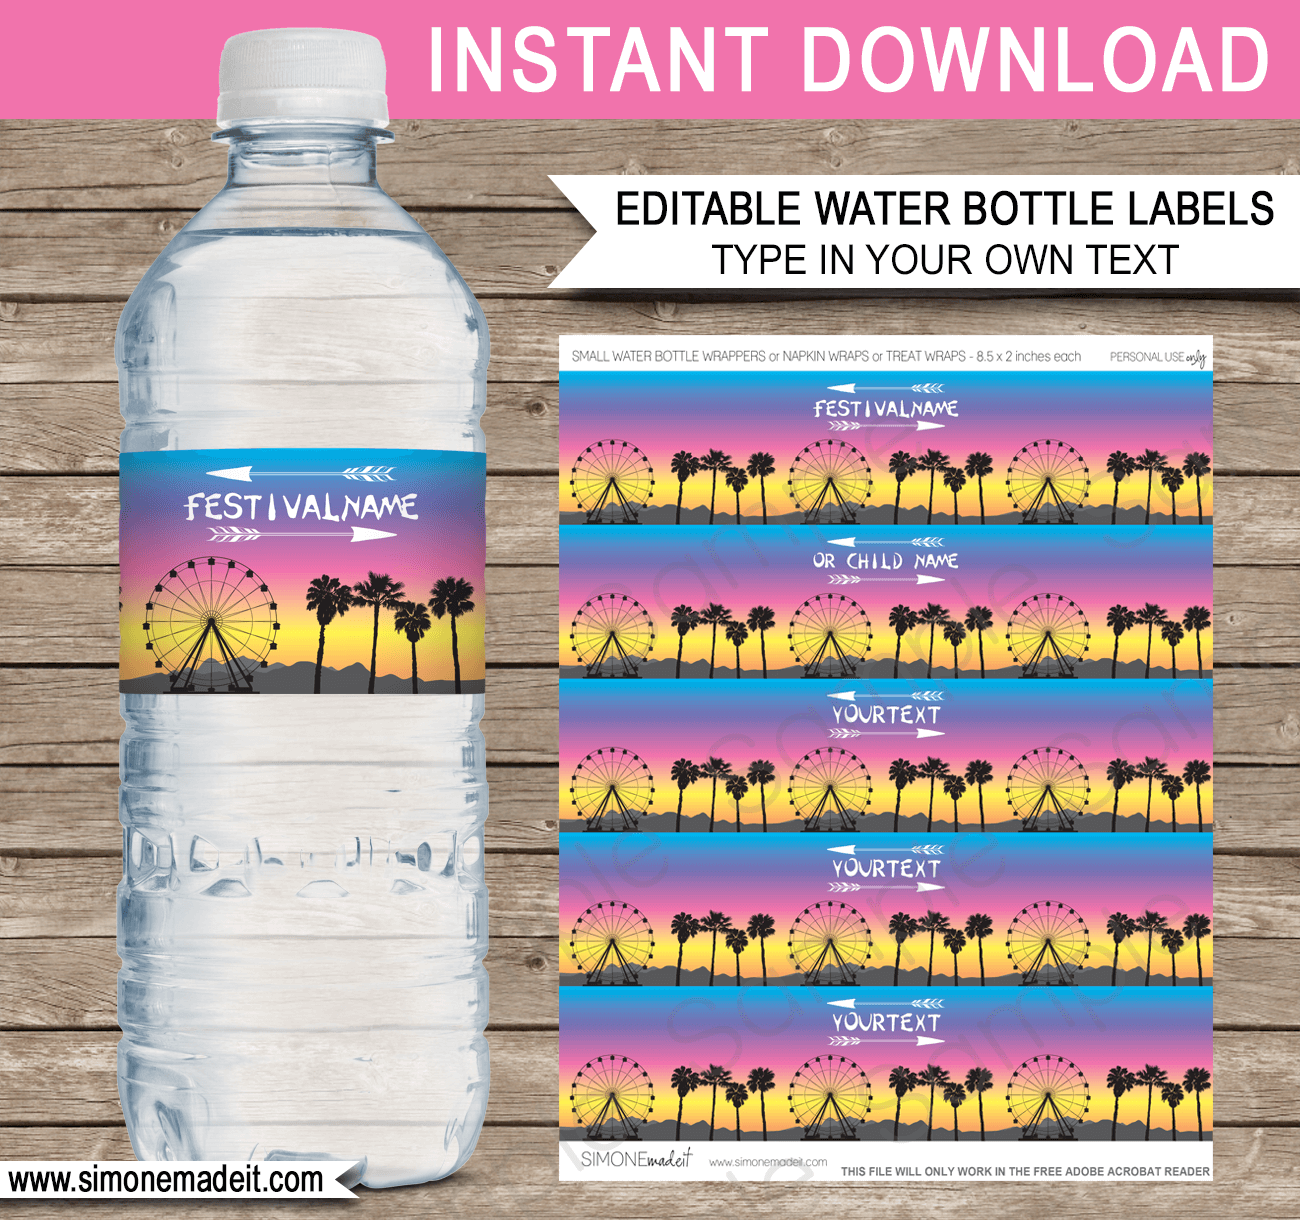 Printable Coachella Party Water Bottle Labels | Festival Inspired Birthday Party Decorations | Editable DIY Template | Fete, Gala, Fair, Carnival, Music Festival | INSTANT DOWNLOAD via SIMONEmadeit.com